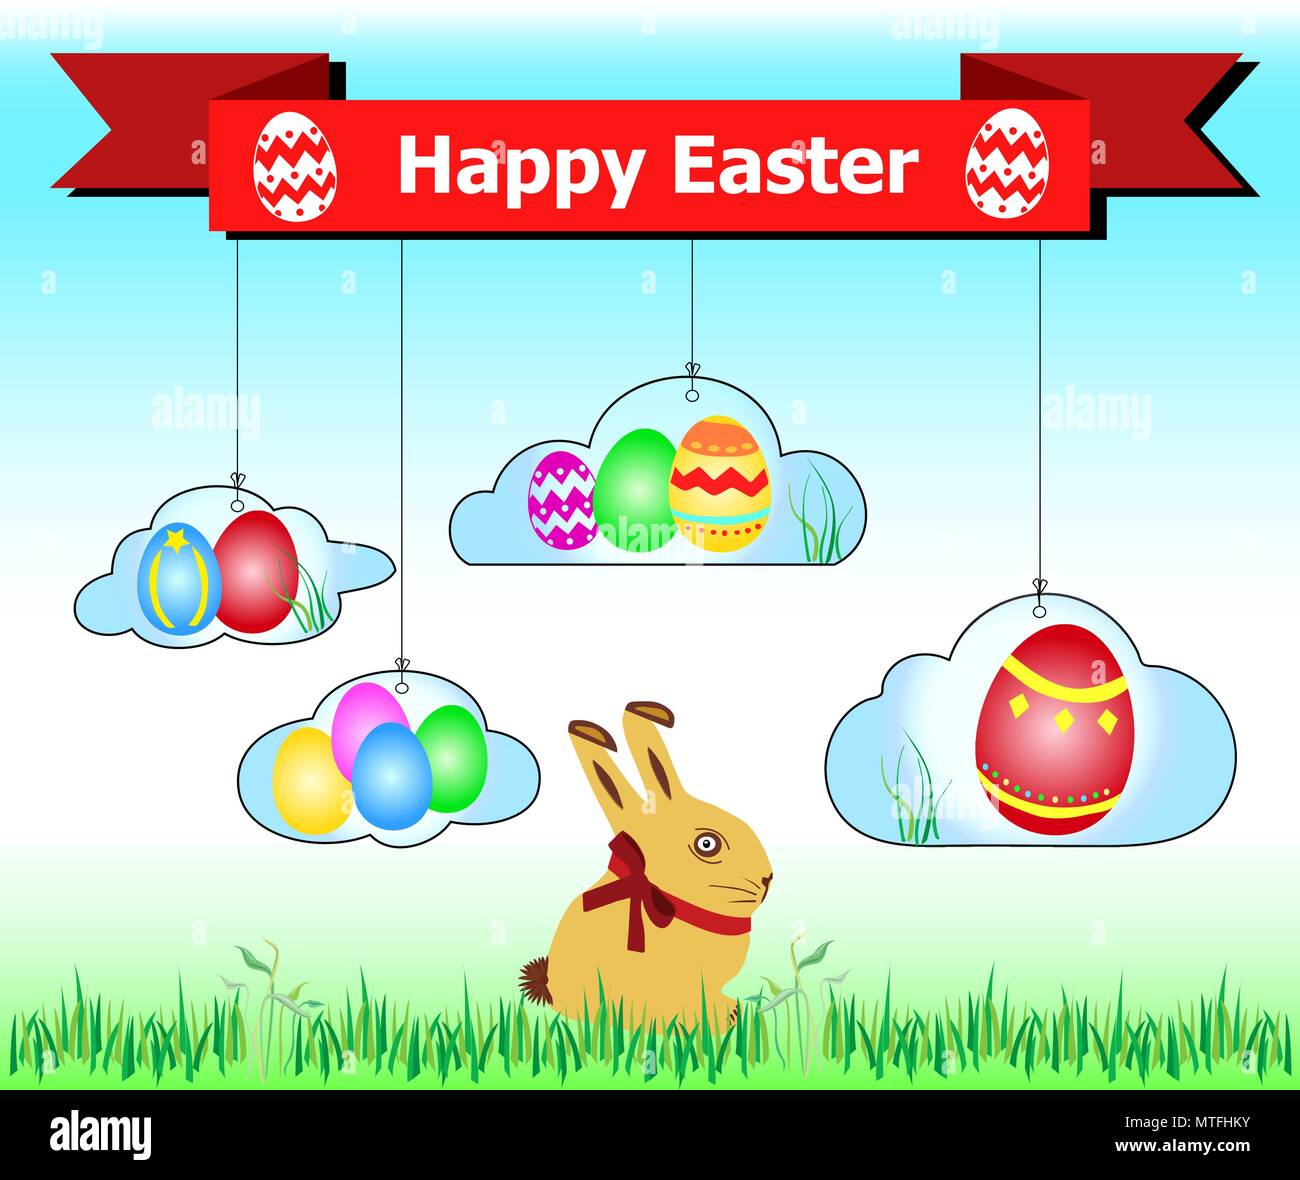 Easter bunny in grass with colorful eggs hanging from the banners Stock Vector